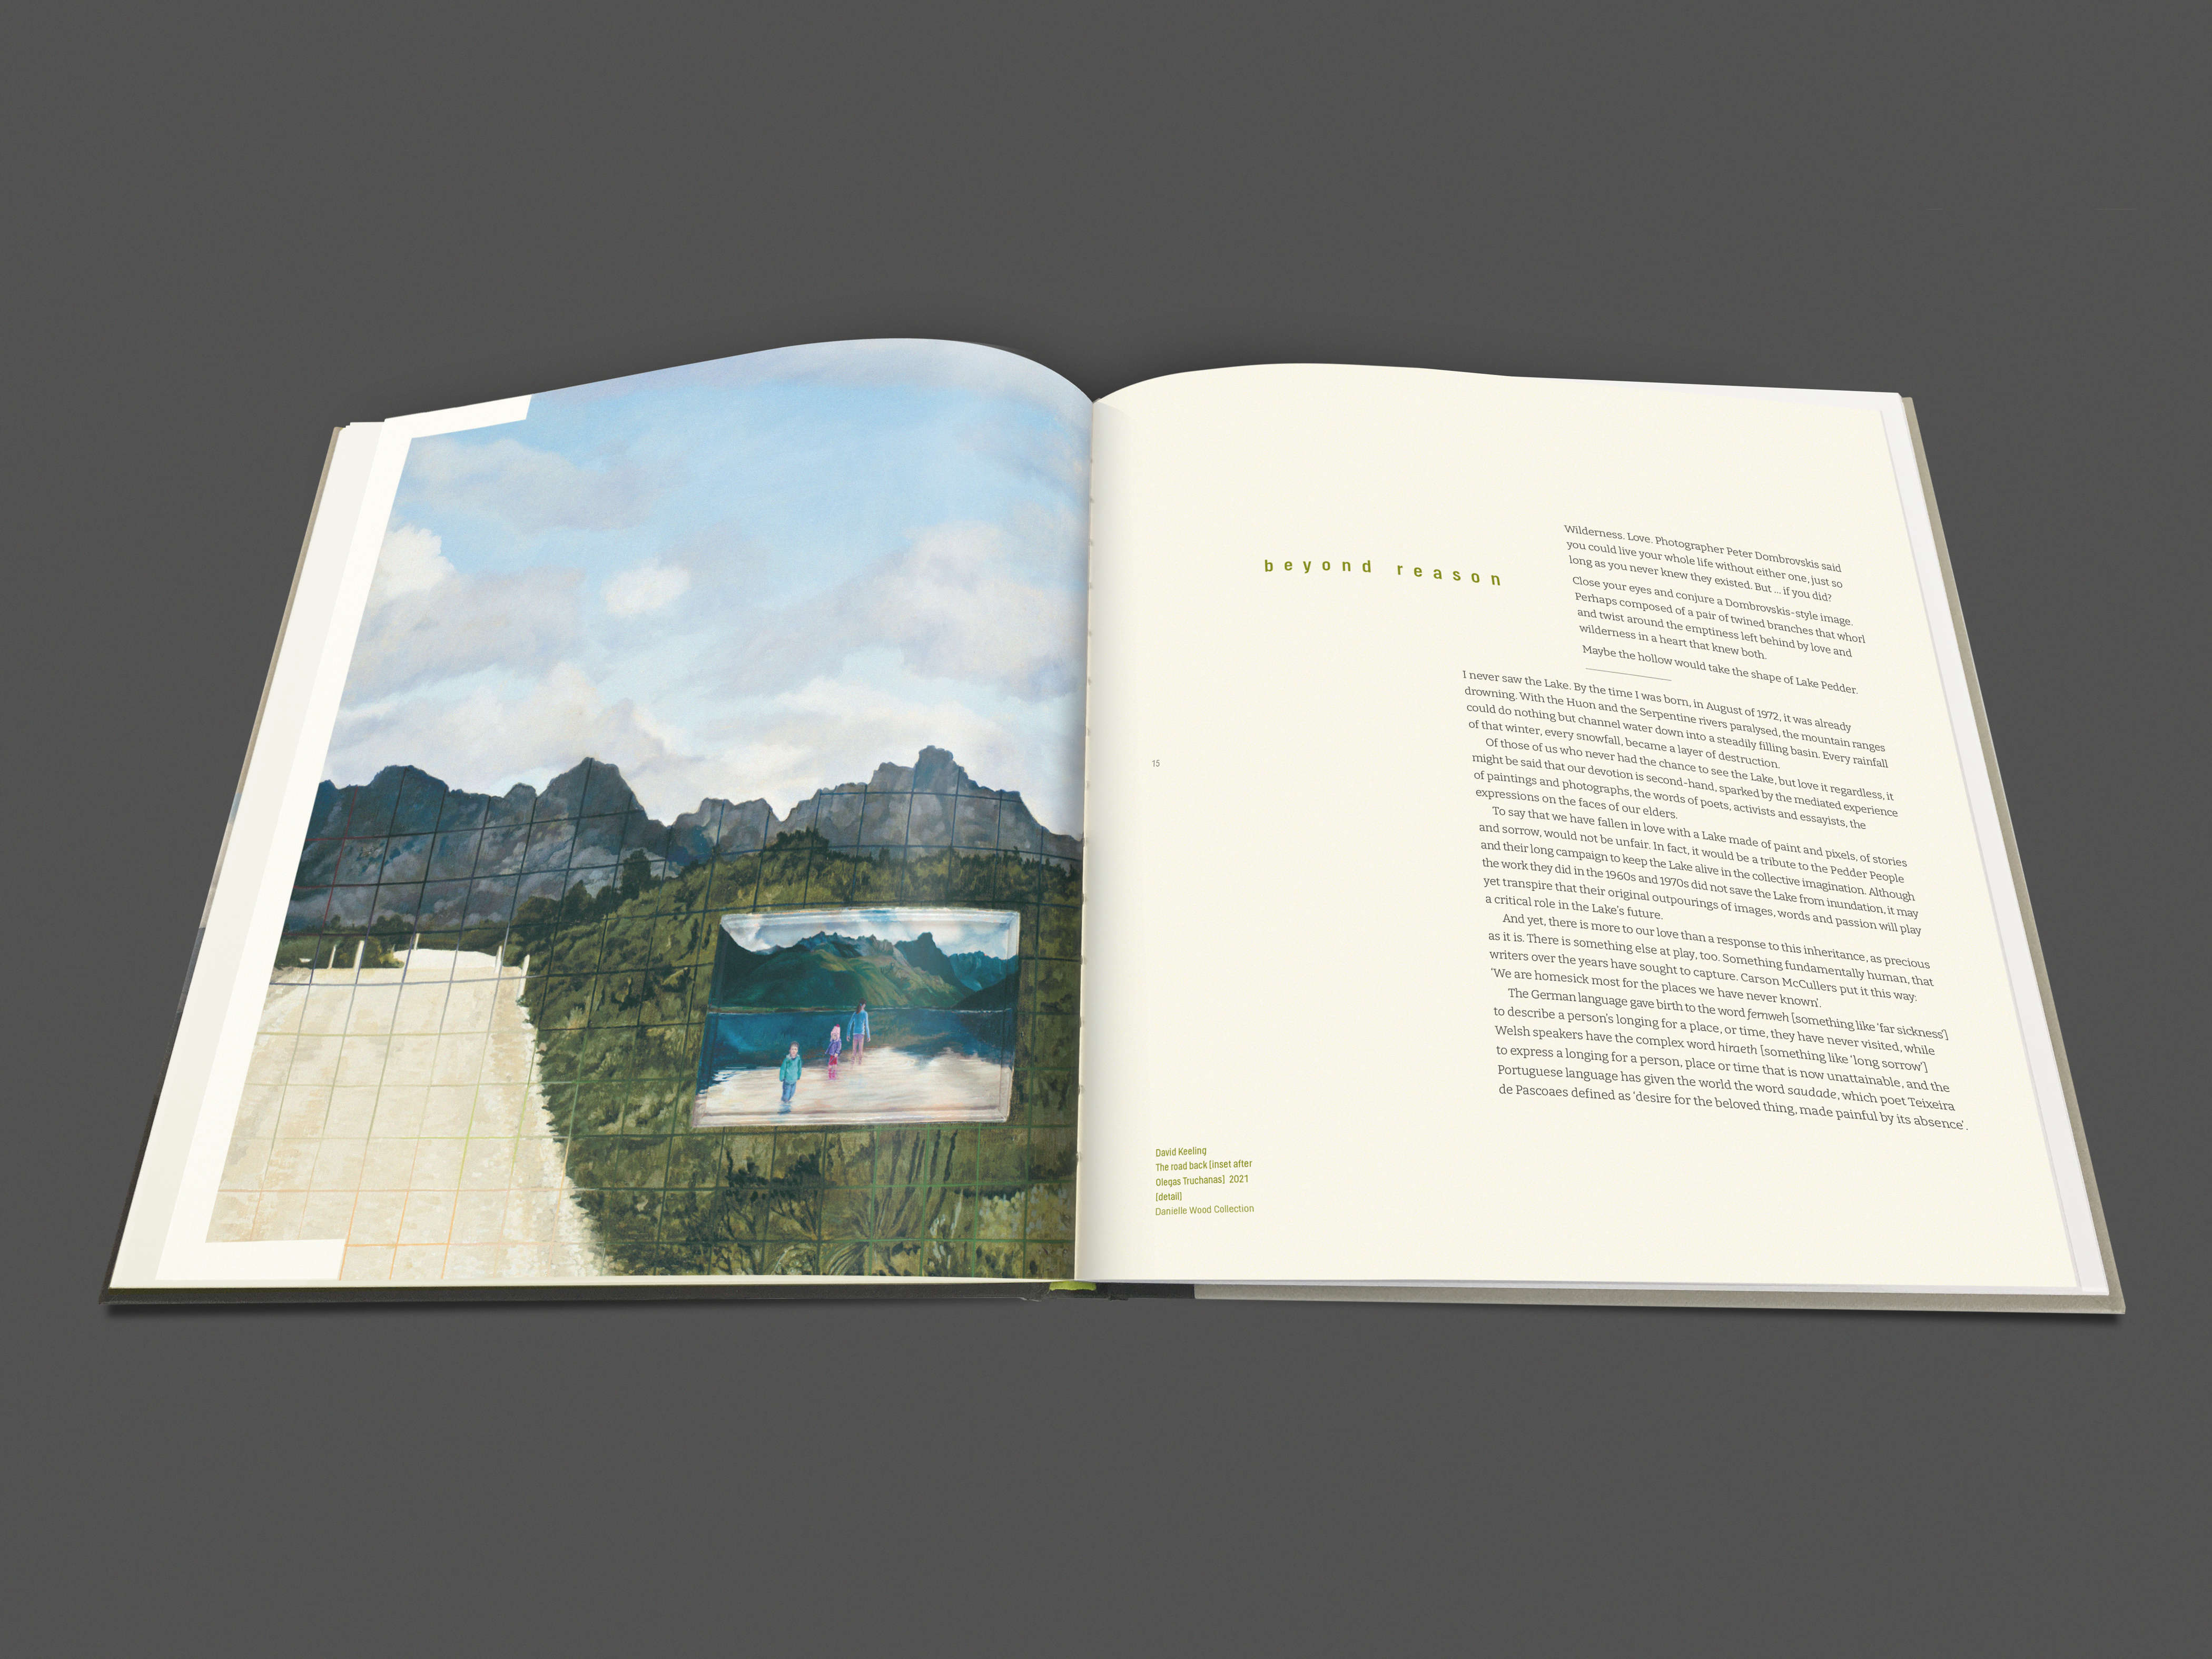 Image of a double-page spread from the water[shed] exhibition publication (pages 14 & 15). The left-hand page features a detail from the oil painting by David Keeling titled, ‘The road back (inset after Olegas Truchanas)’ (2021). The painting shows a section of the unsealed Scotts Peak Road with a topographic map grid overlay and rugged mountain ranges in the background. A small inset image depicts three children paddling in the shallow water of the original Lake Pedder before it was flooded. The right-hand page is the first page of the essay by Danielle Wood titled ‘Beyond Reason’.